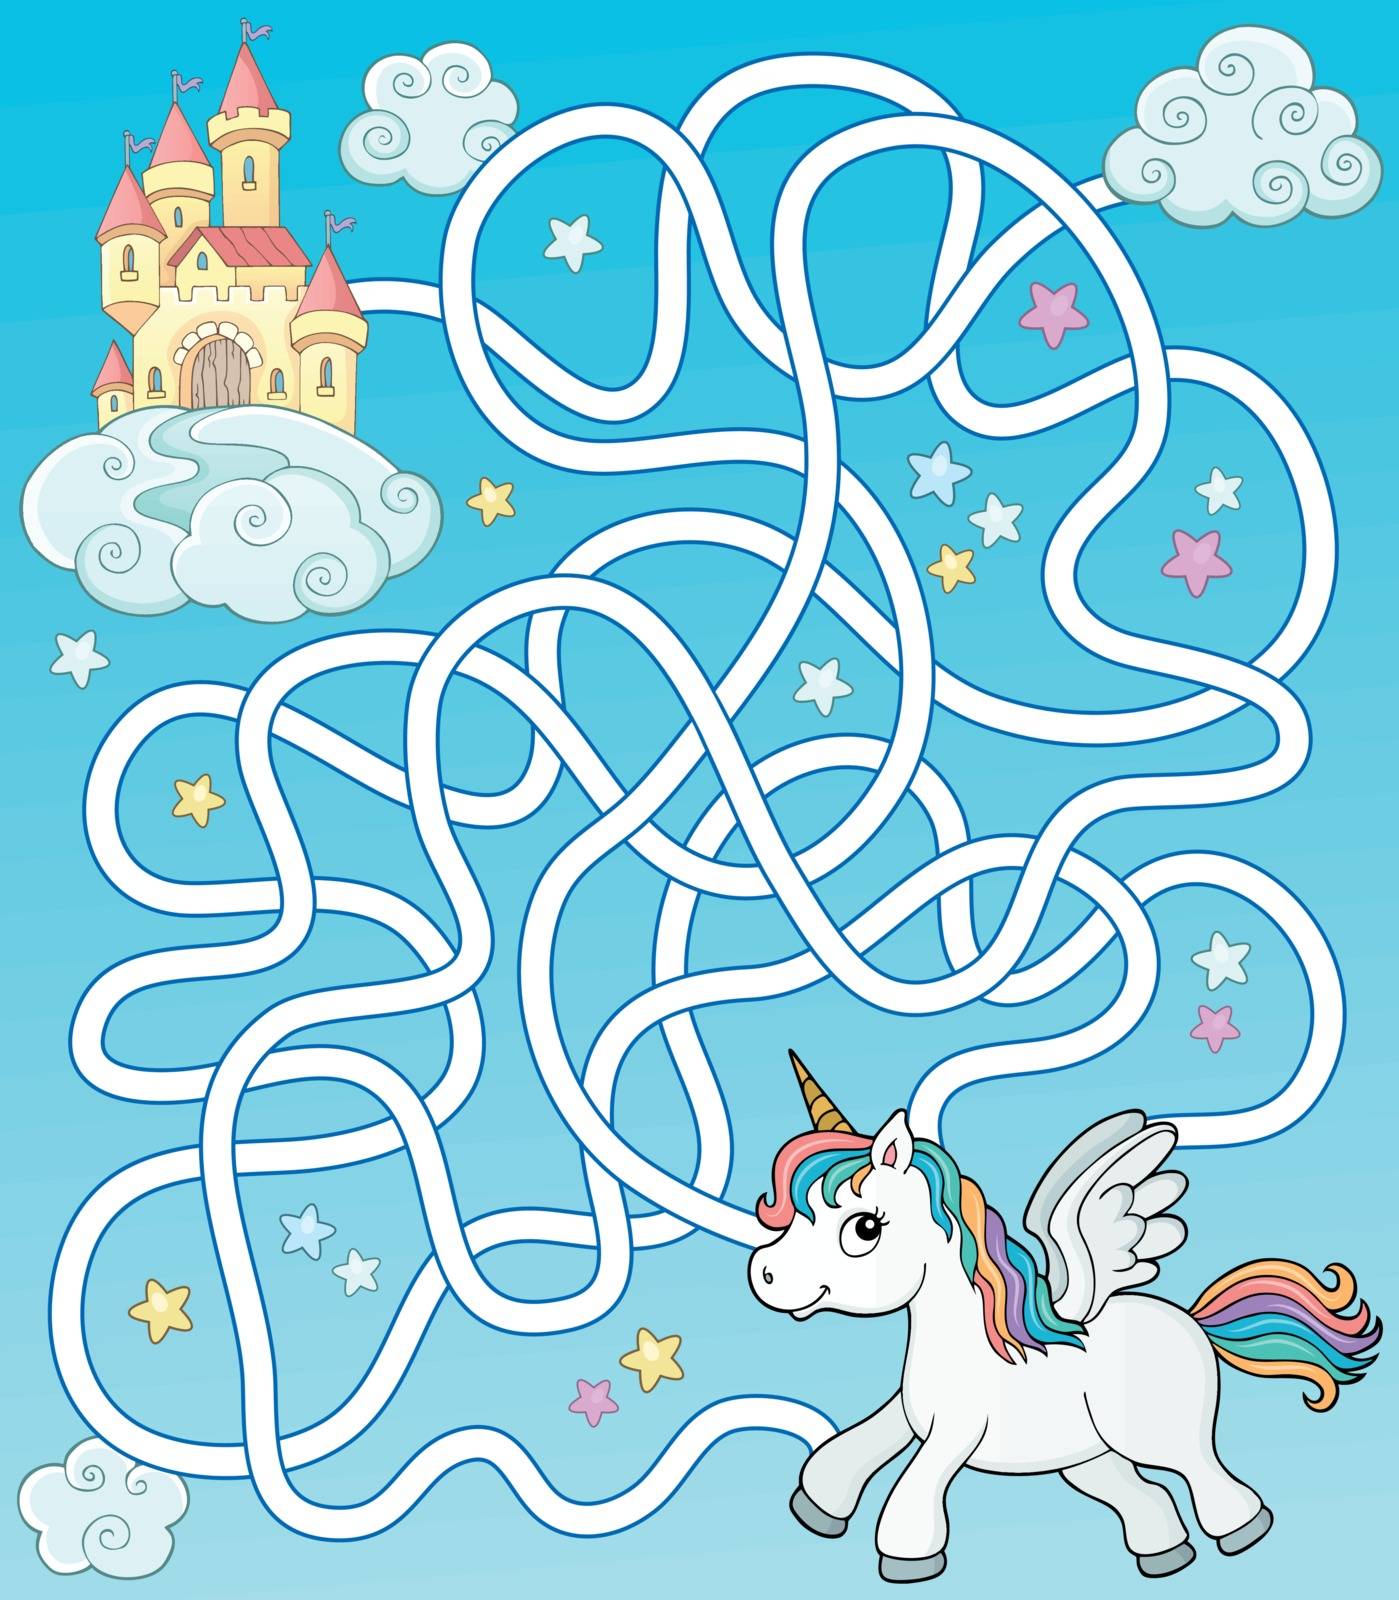 Maze 35 with flying unicorn and castle - eps10 vector illustration.